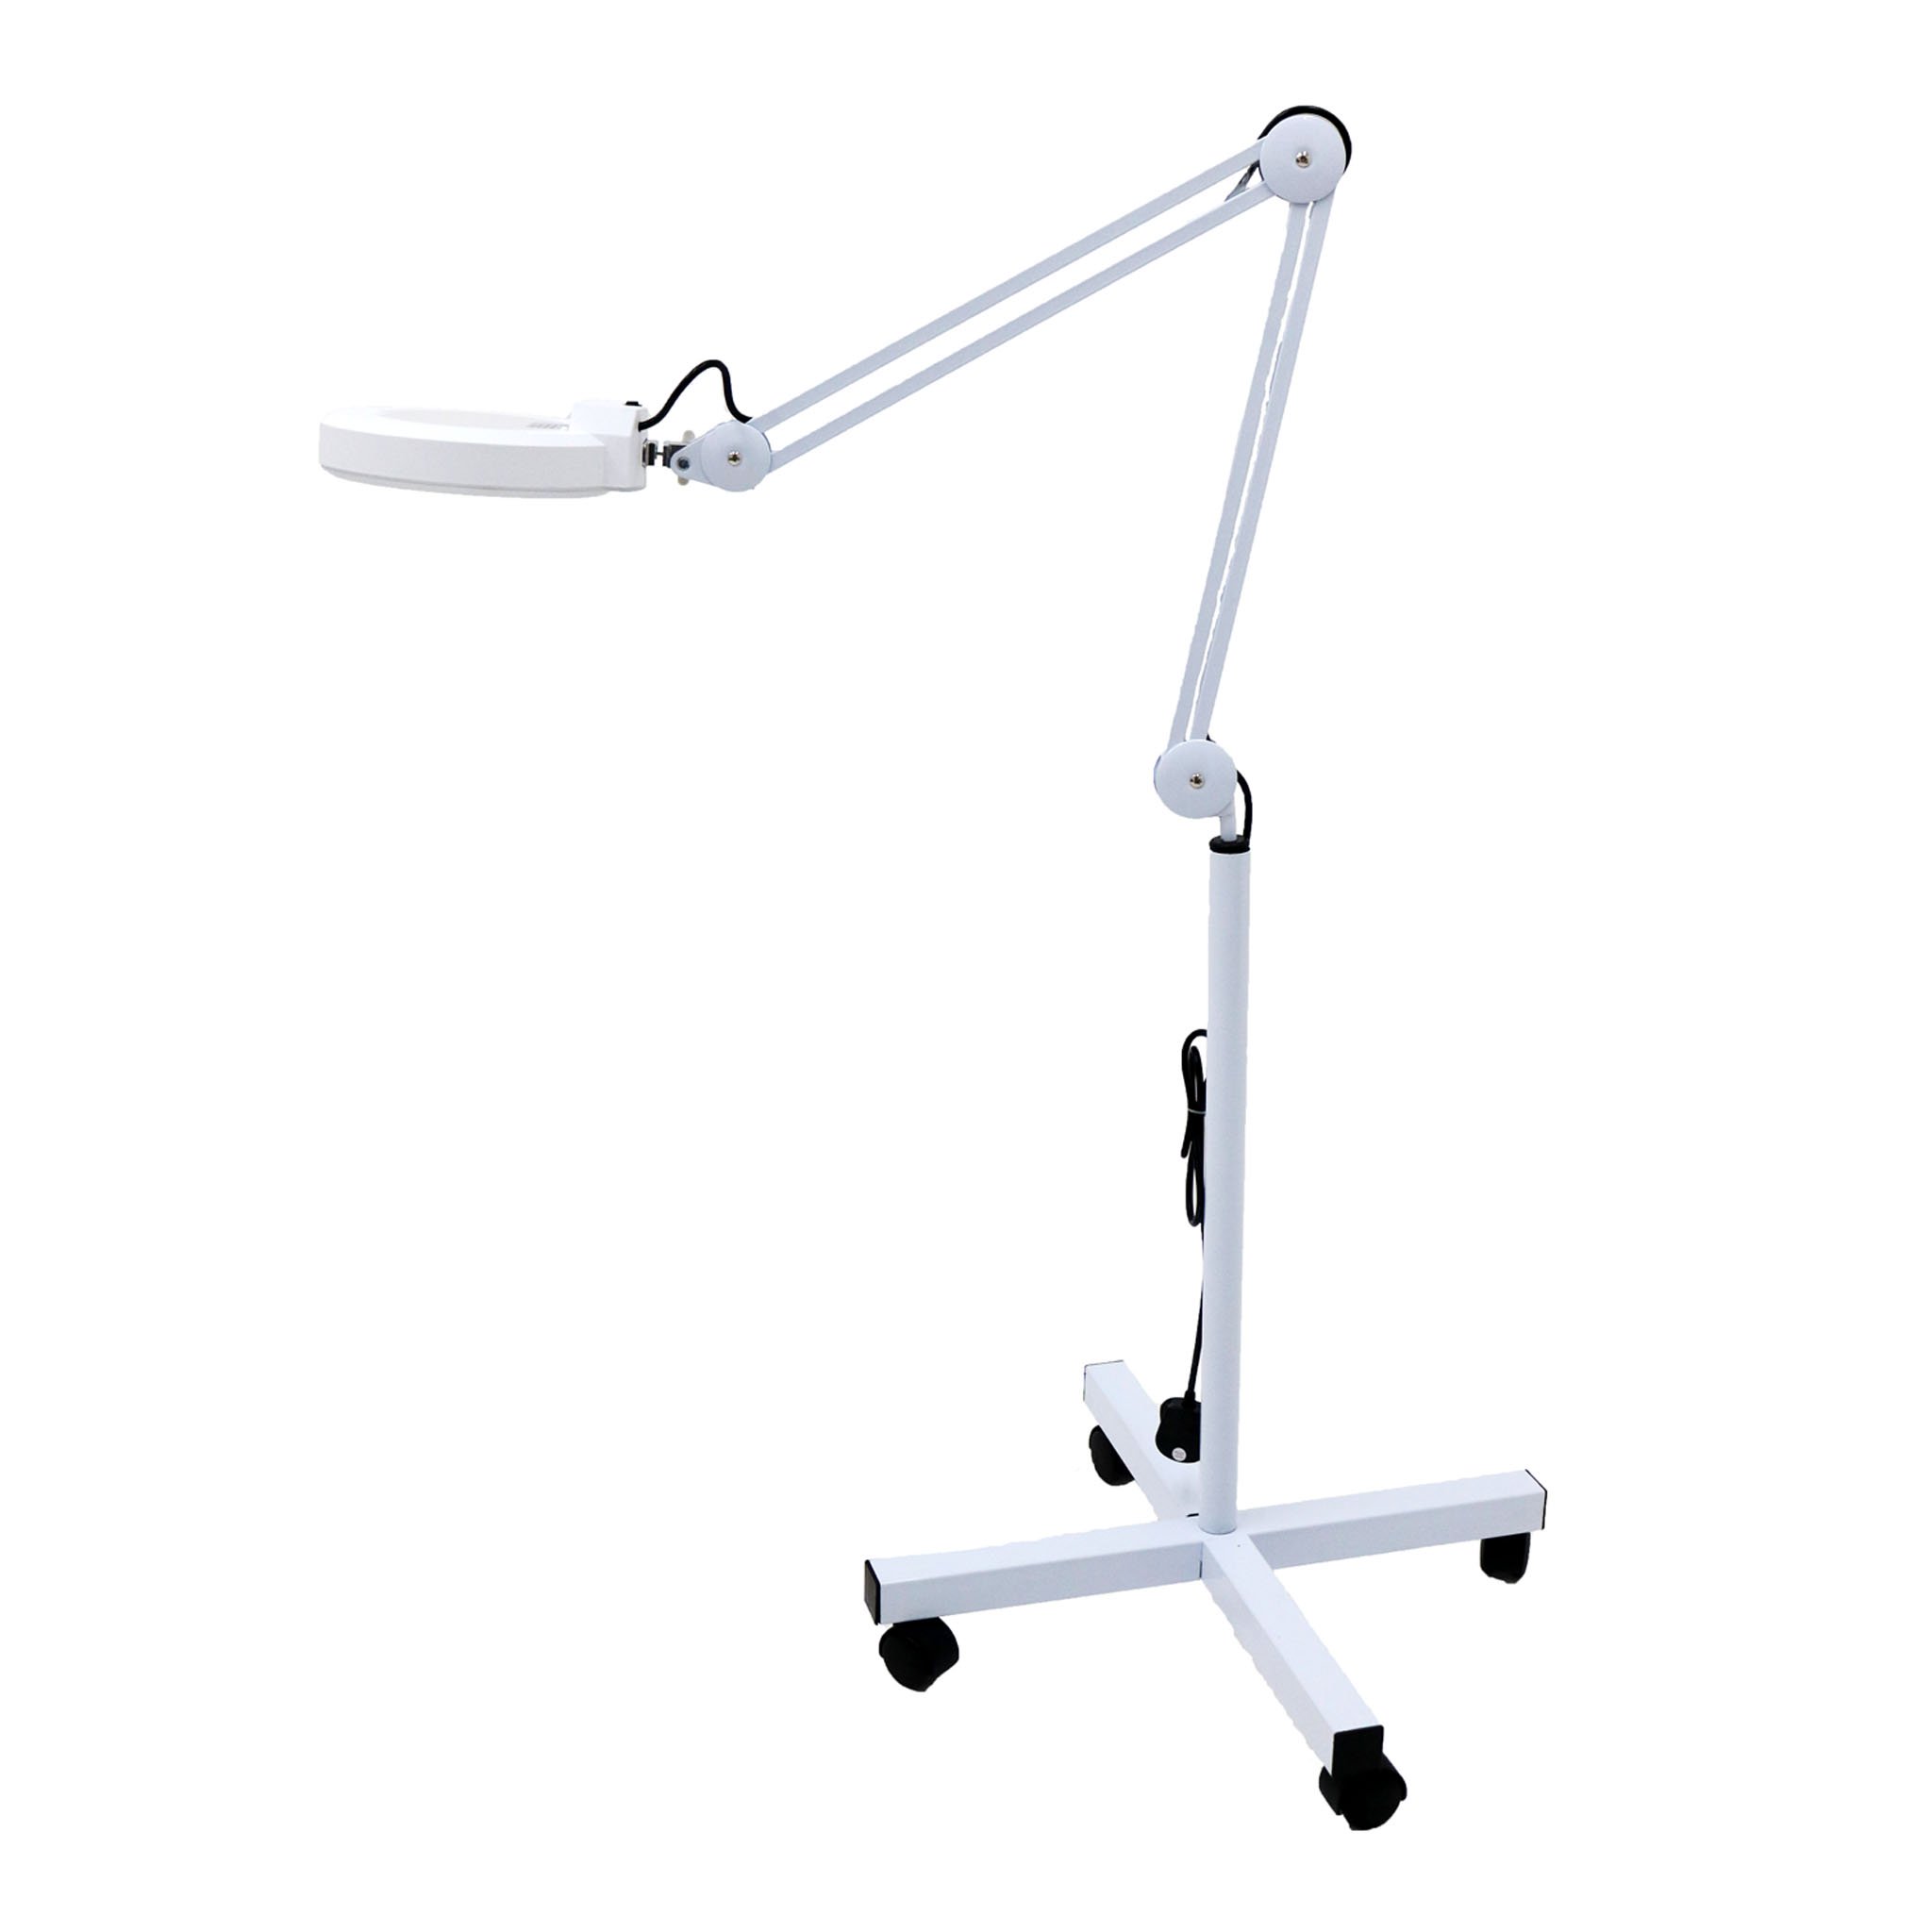 Floor Standing Magnifier Lamp with 5x Magnification